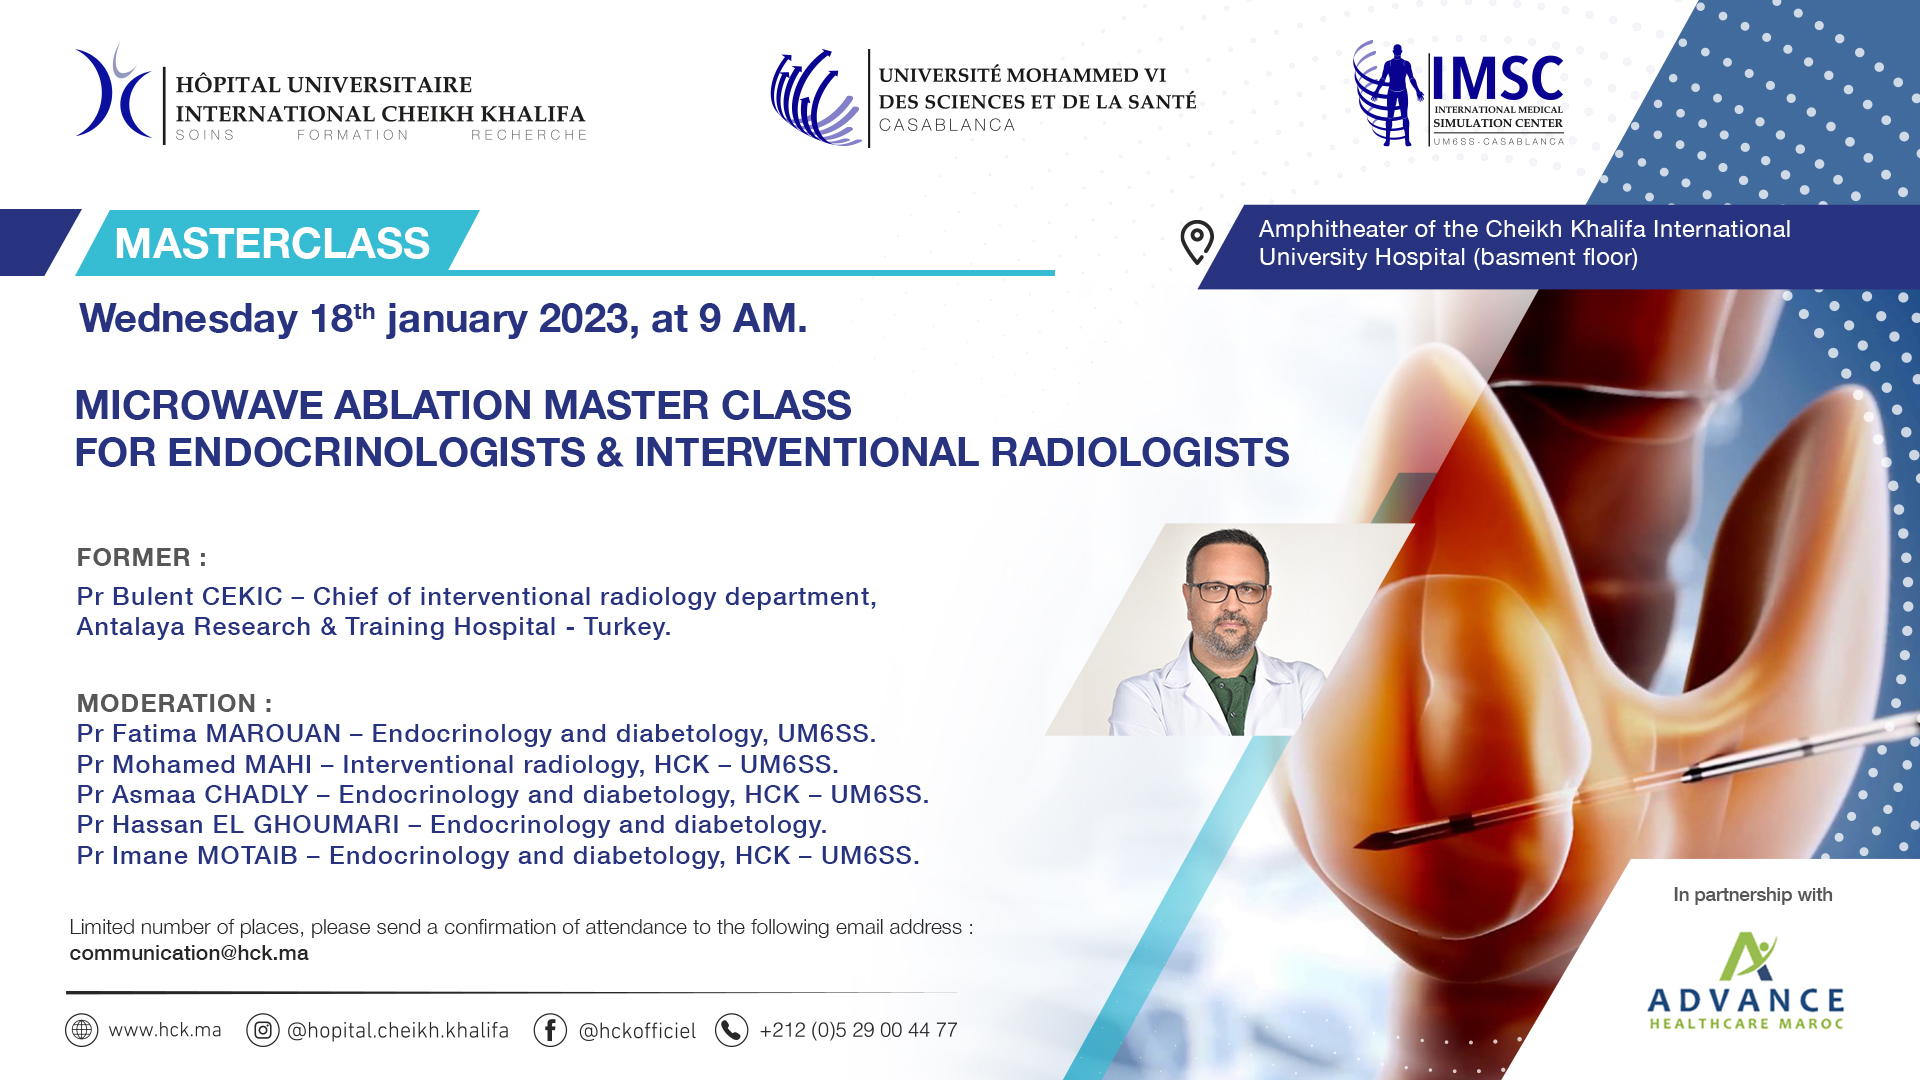 MASTERCLASS: MICROWAVE ABLATION MASTERCLASS FOR ENDOCRINOLOGISTS AND INTERVENTIONAL RADIOLOGISTS